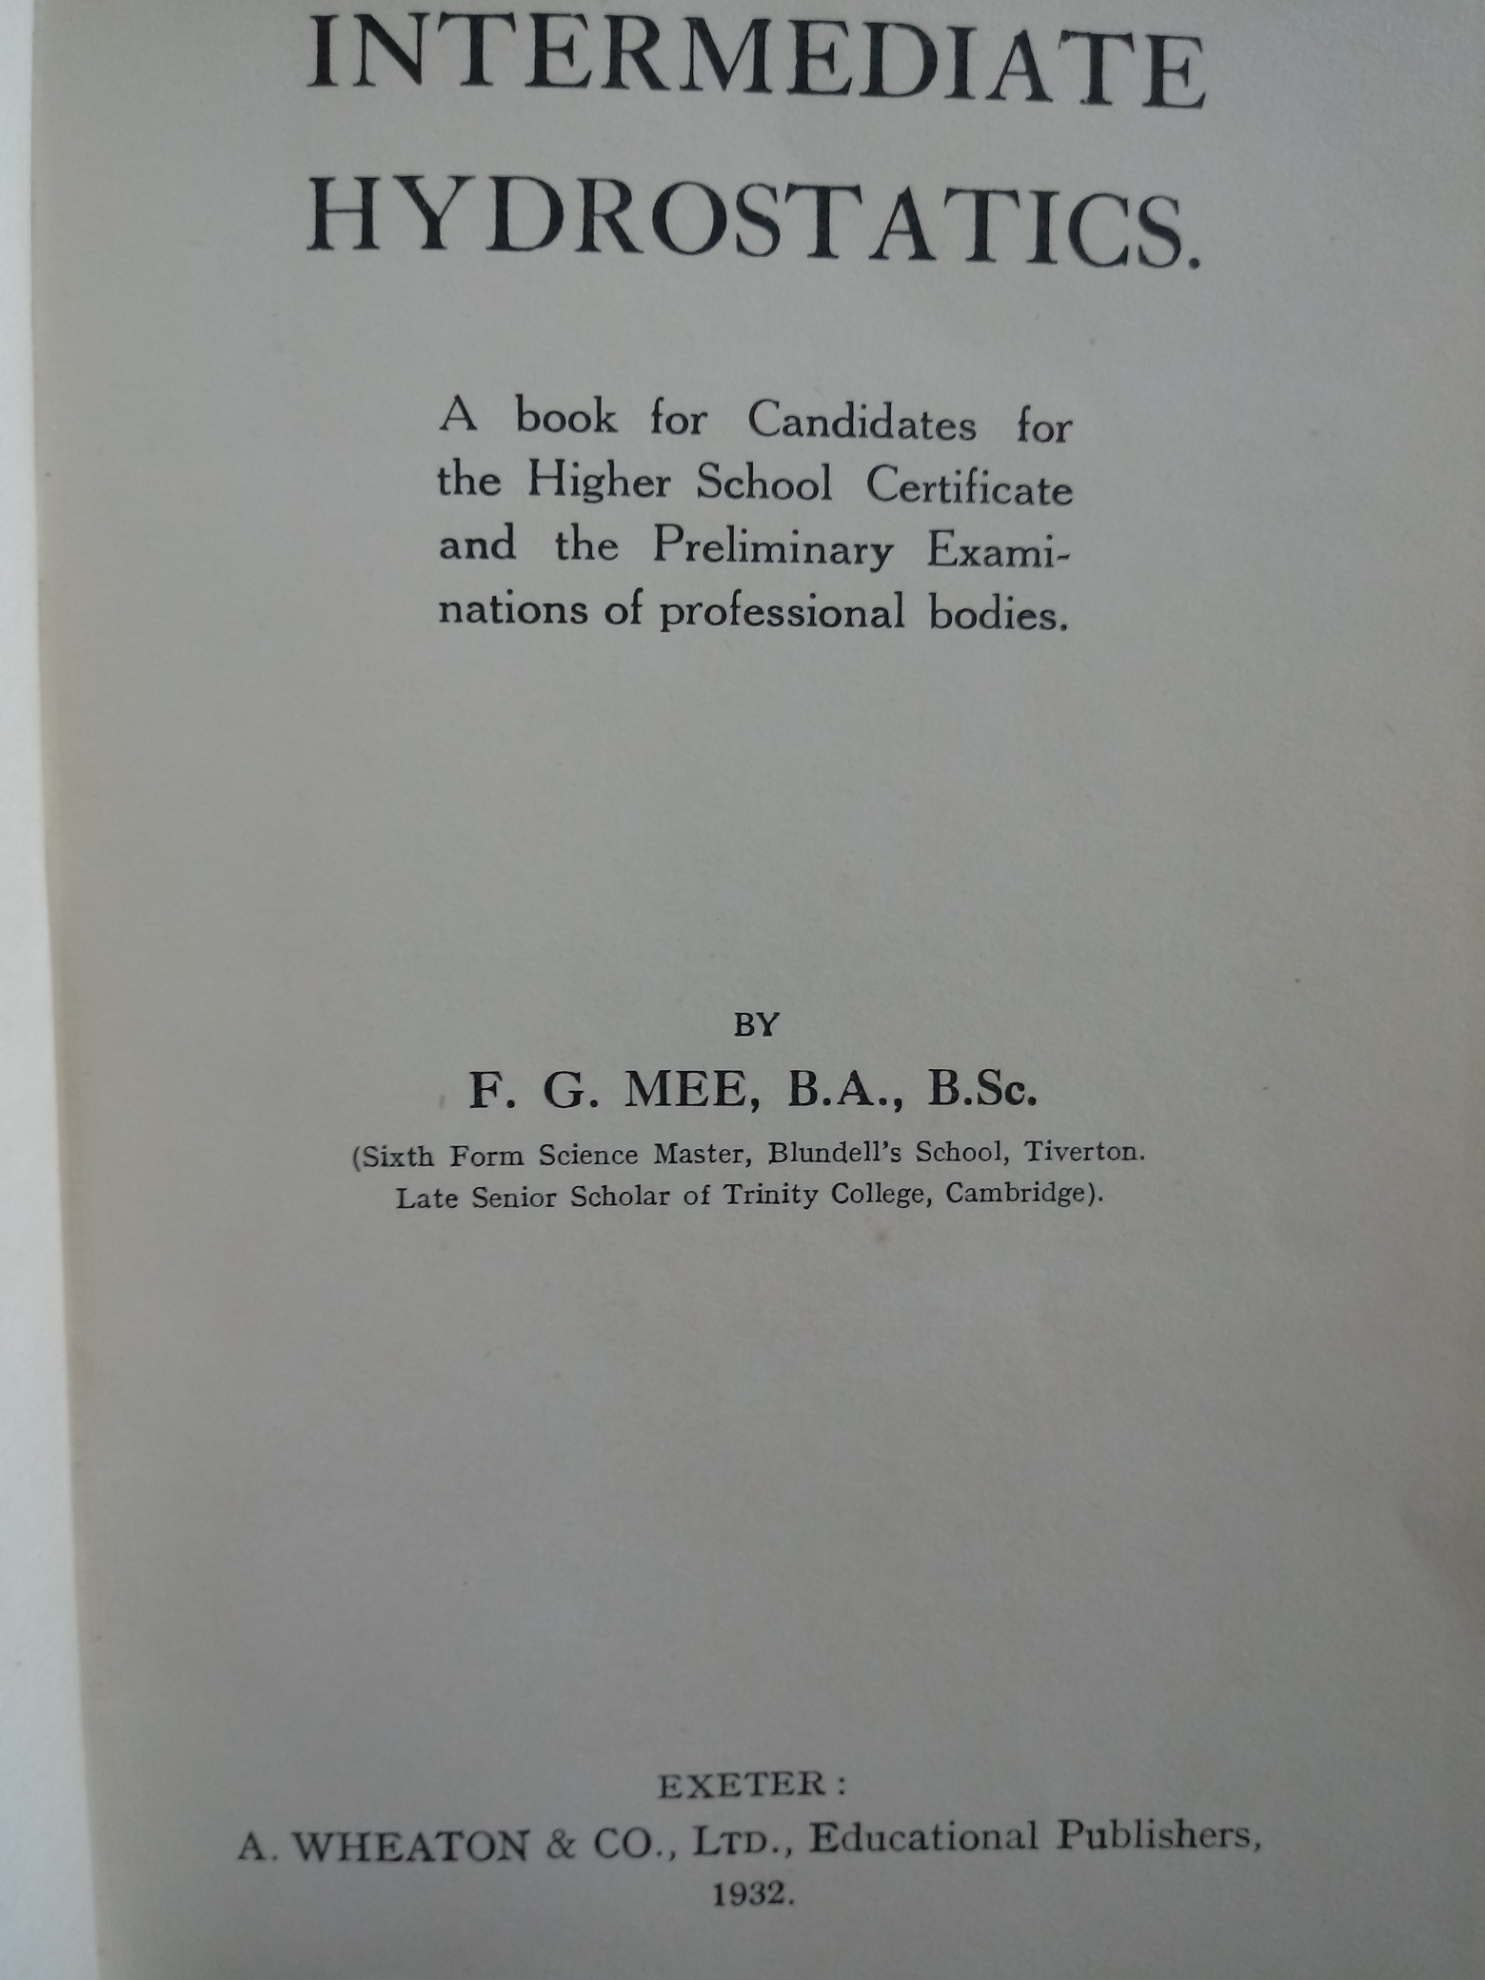 Intermediate Hydrostatics hardback book by F.G. Mee 128 pages published by A. Whaeton & Co. No - Image 2 of 2